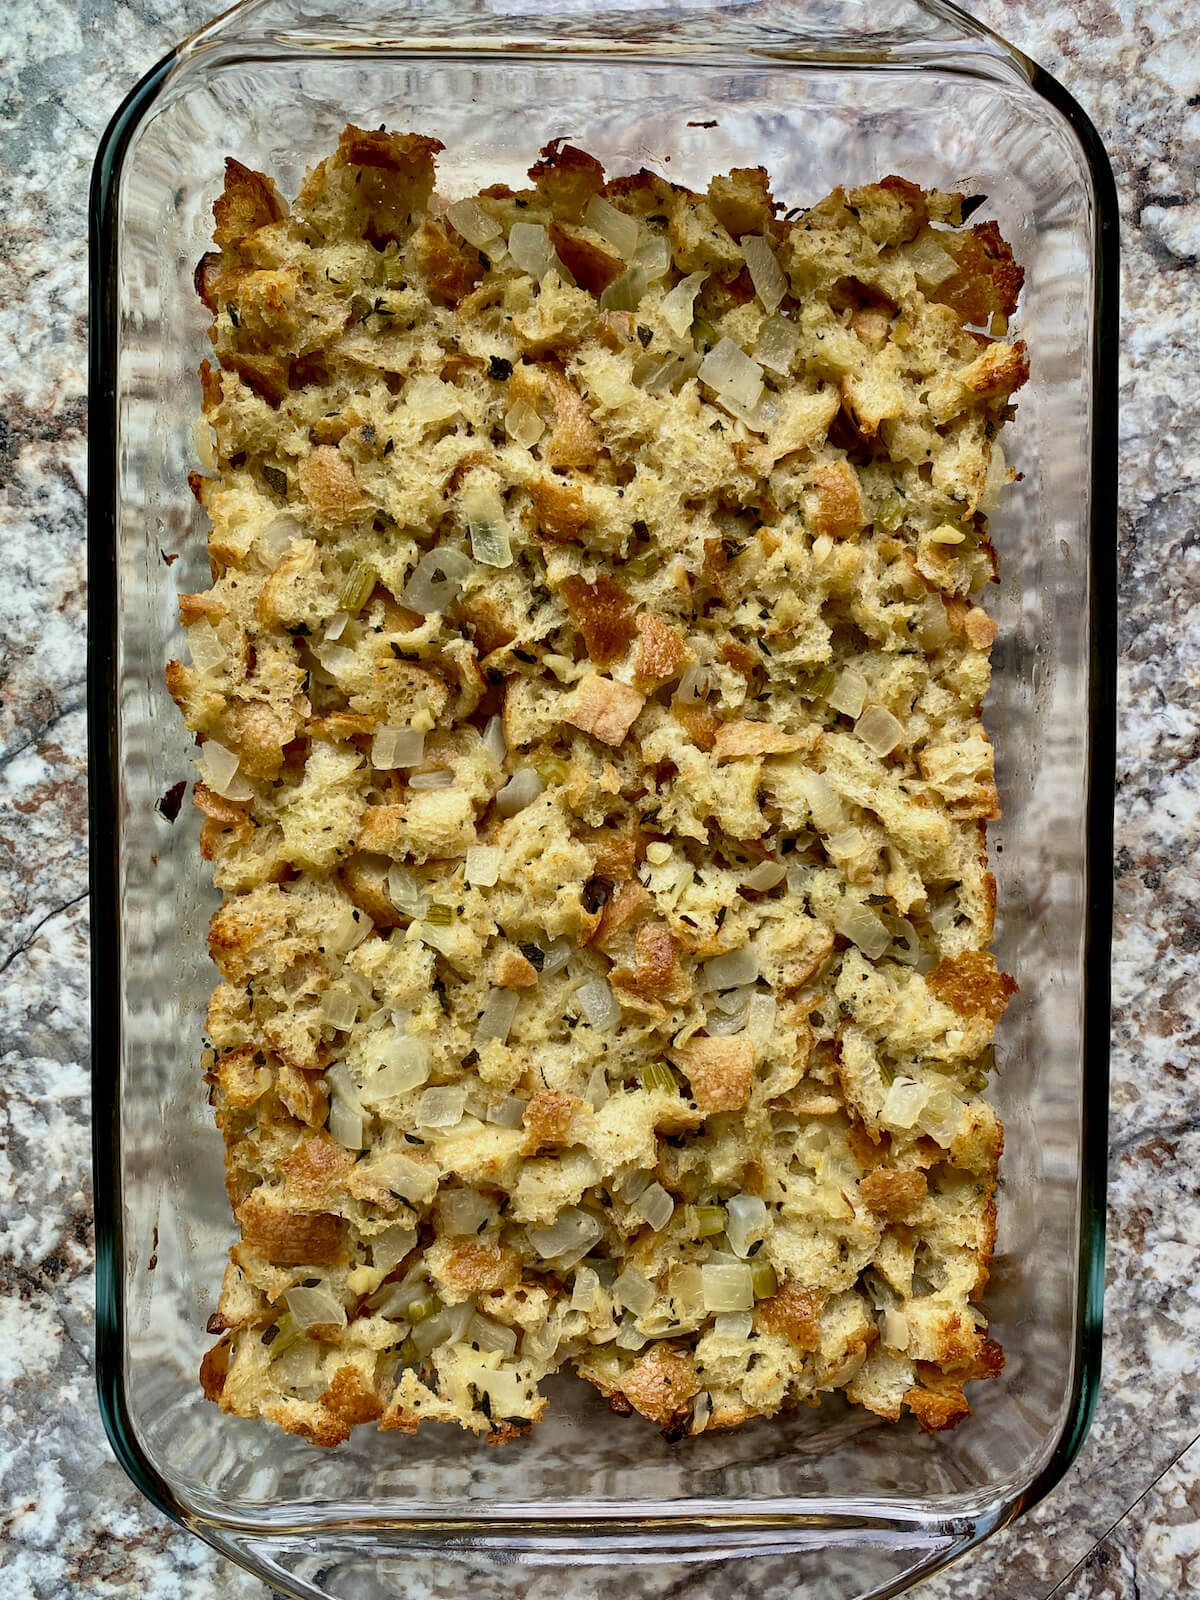 Cooked sourdough stuffing in a clear glass baking dish.